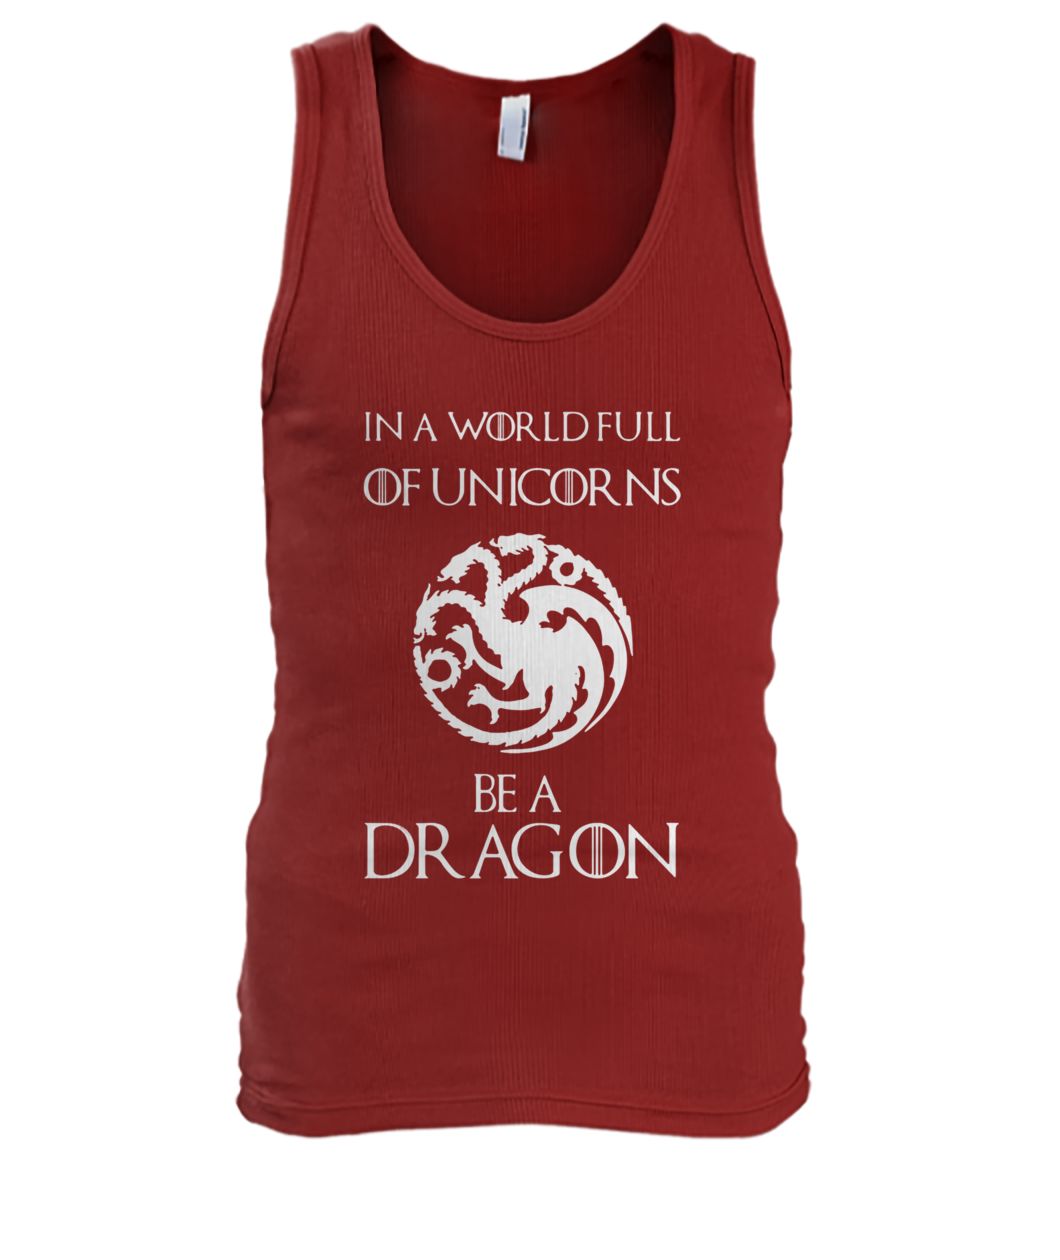 Game of thrones in a world full of unicorns be a dragon men's tank top